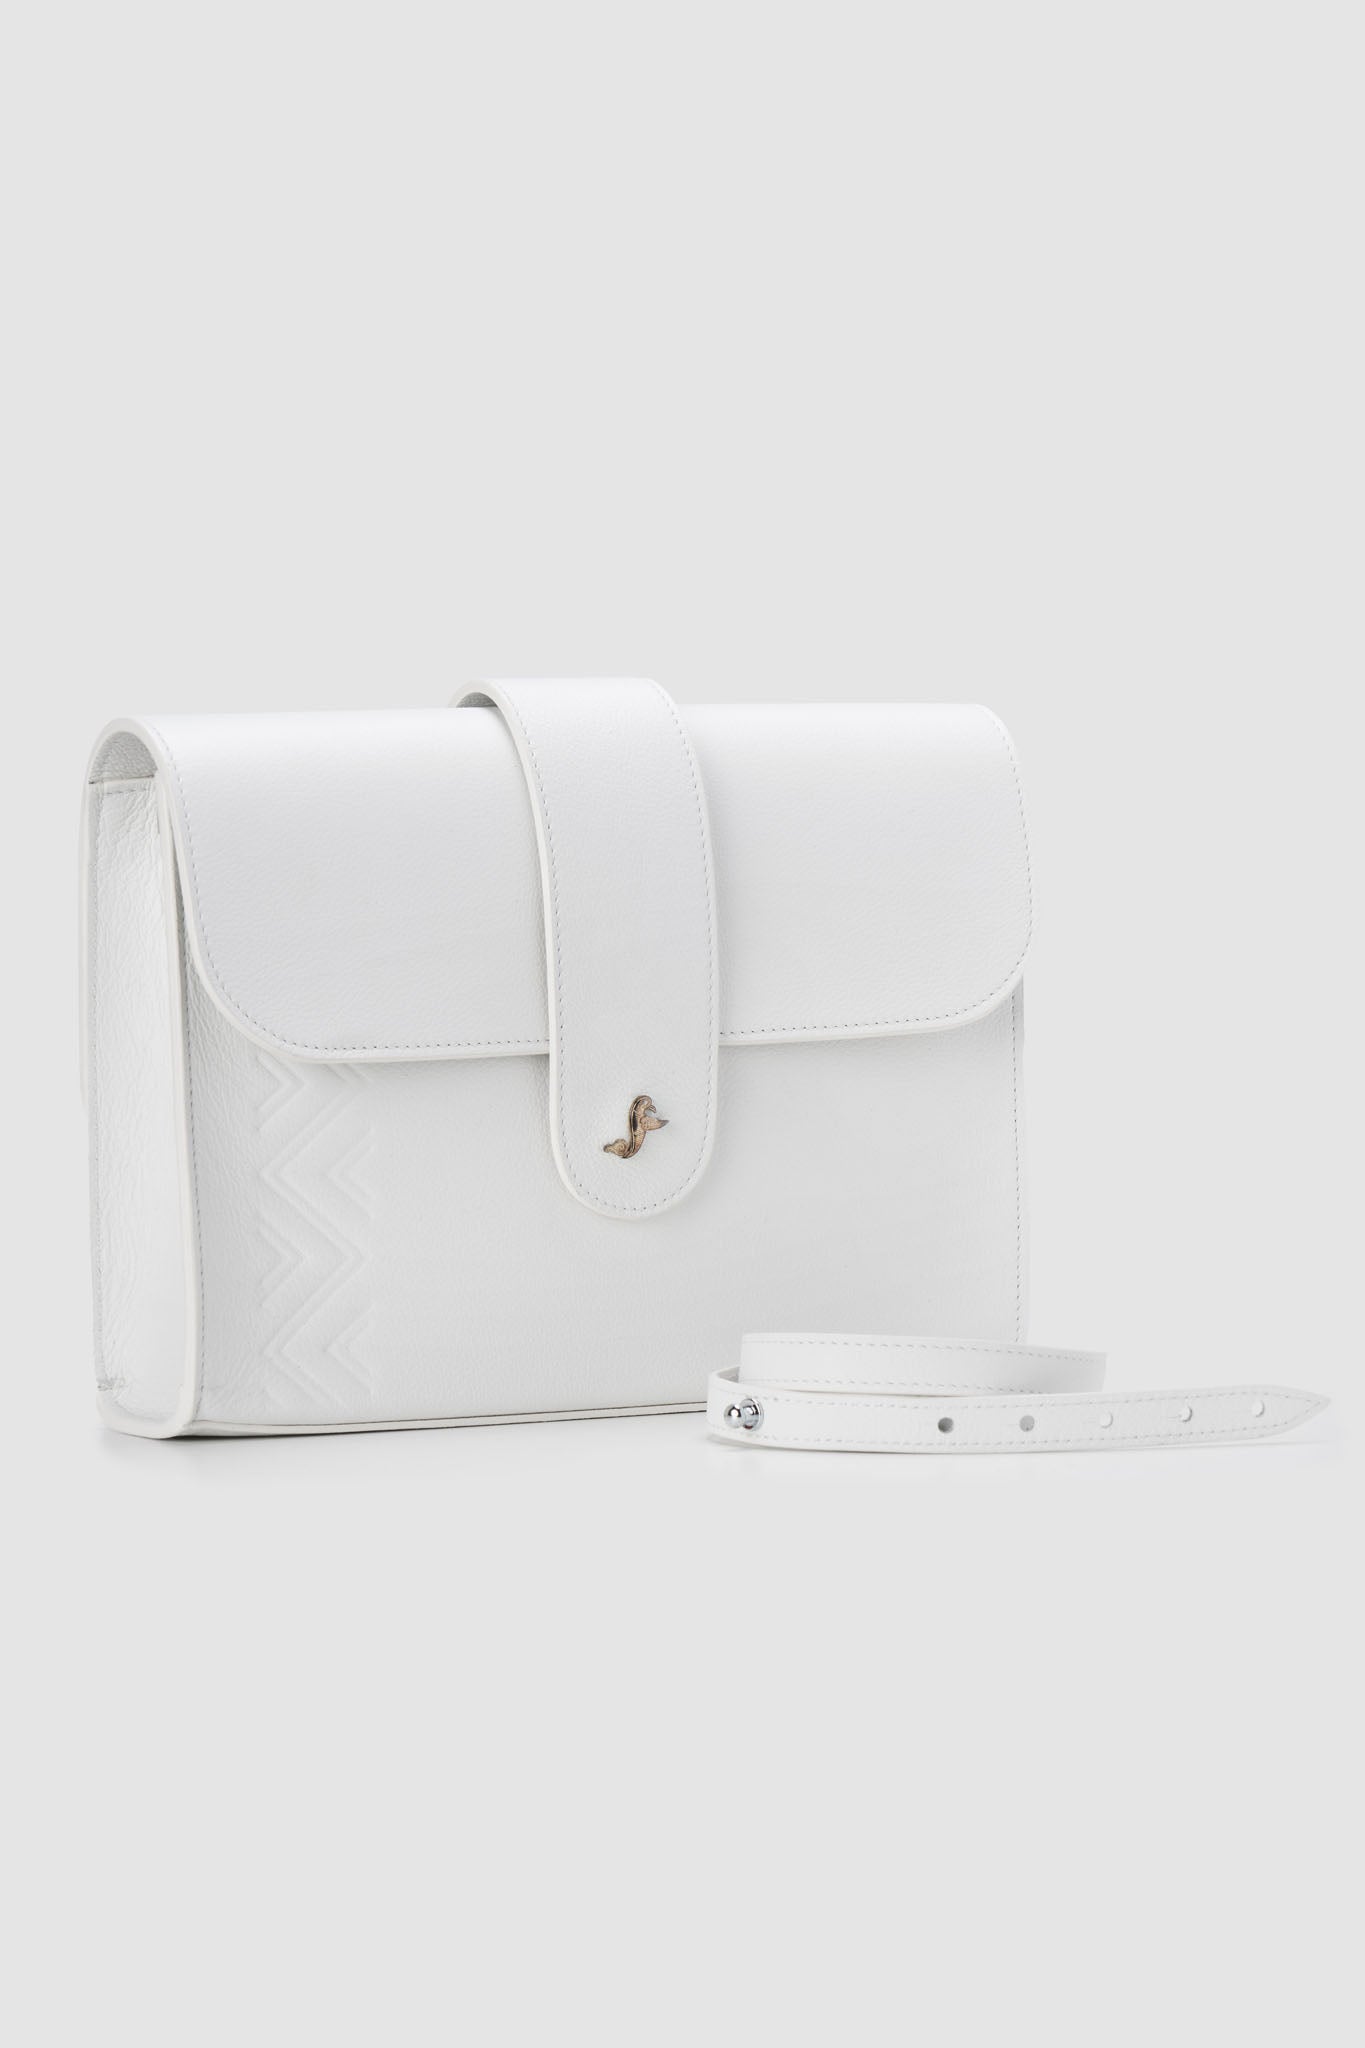 Kars leather clutch in white